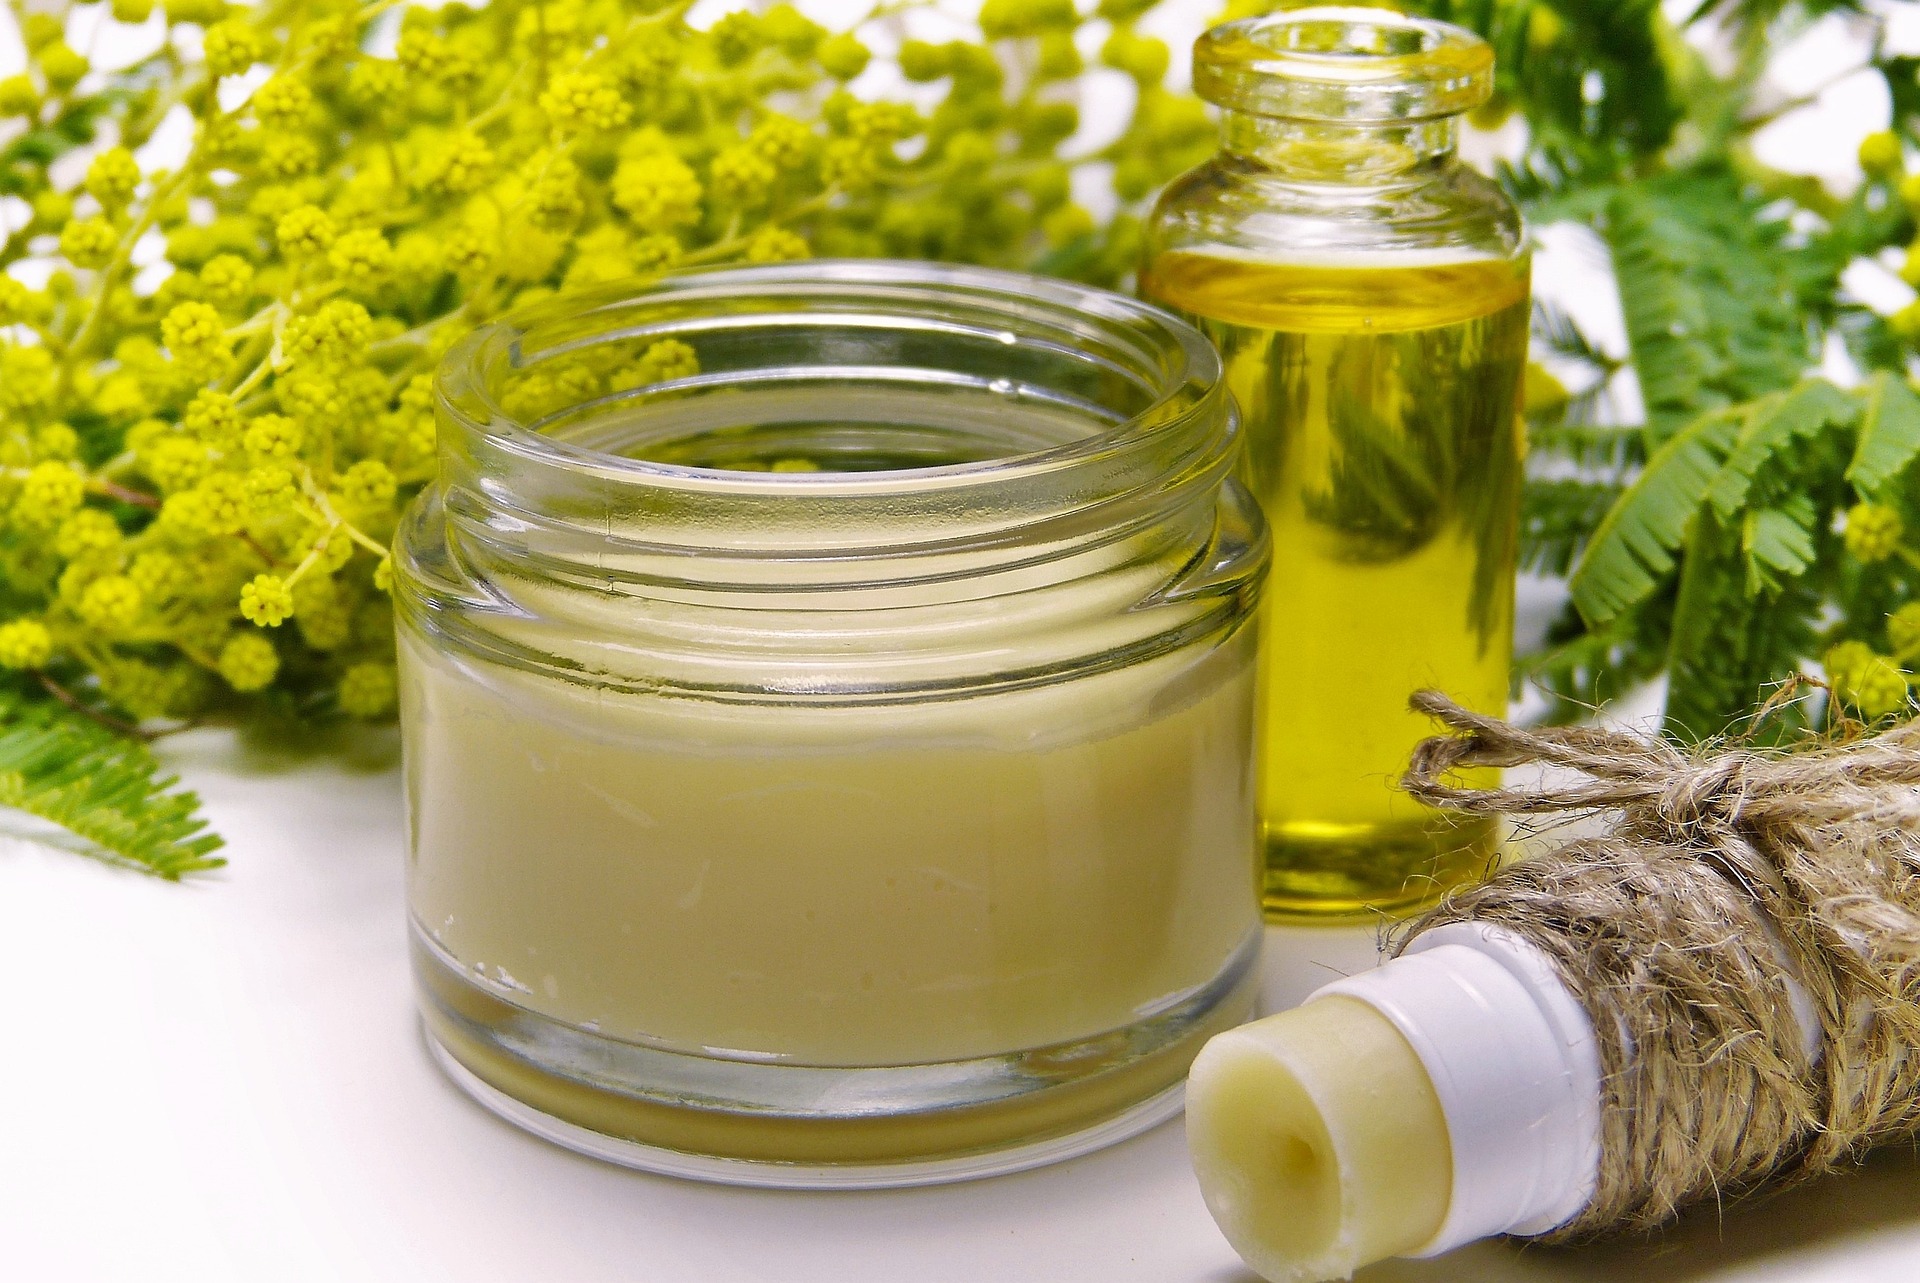 small jar of salve surrounded by yellow flowers, a jar of oil, and an open chapstick